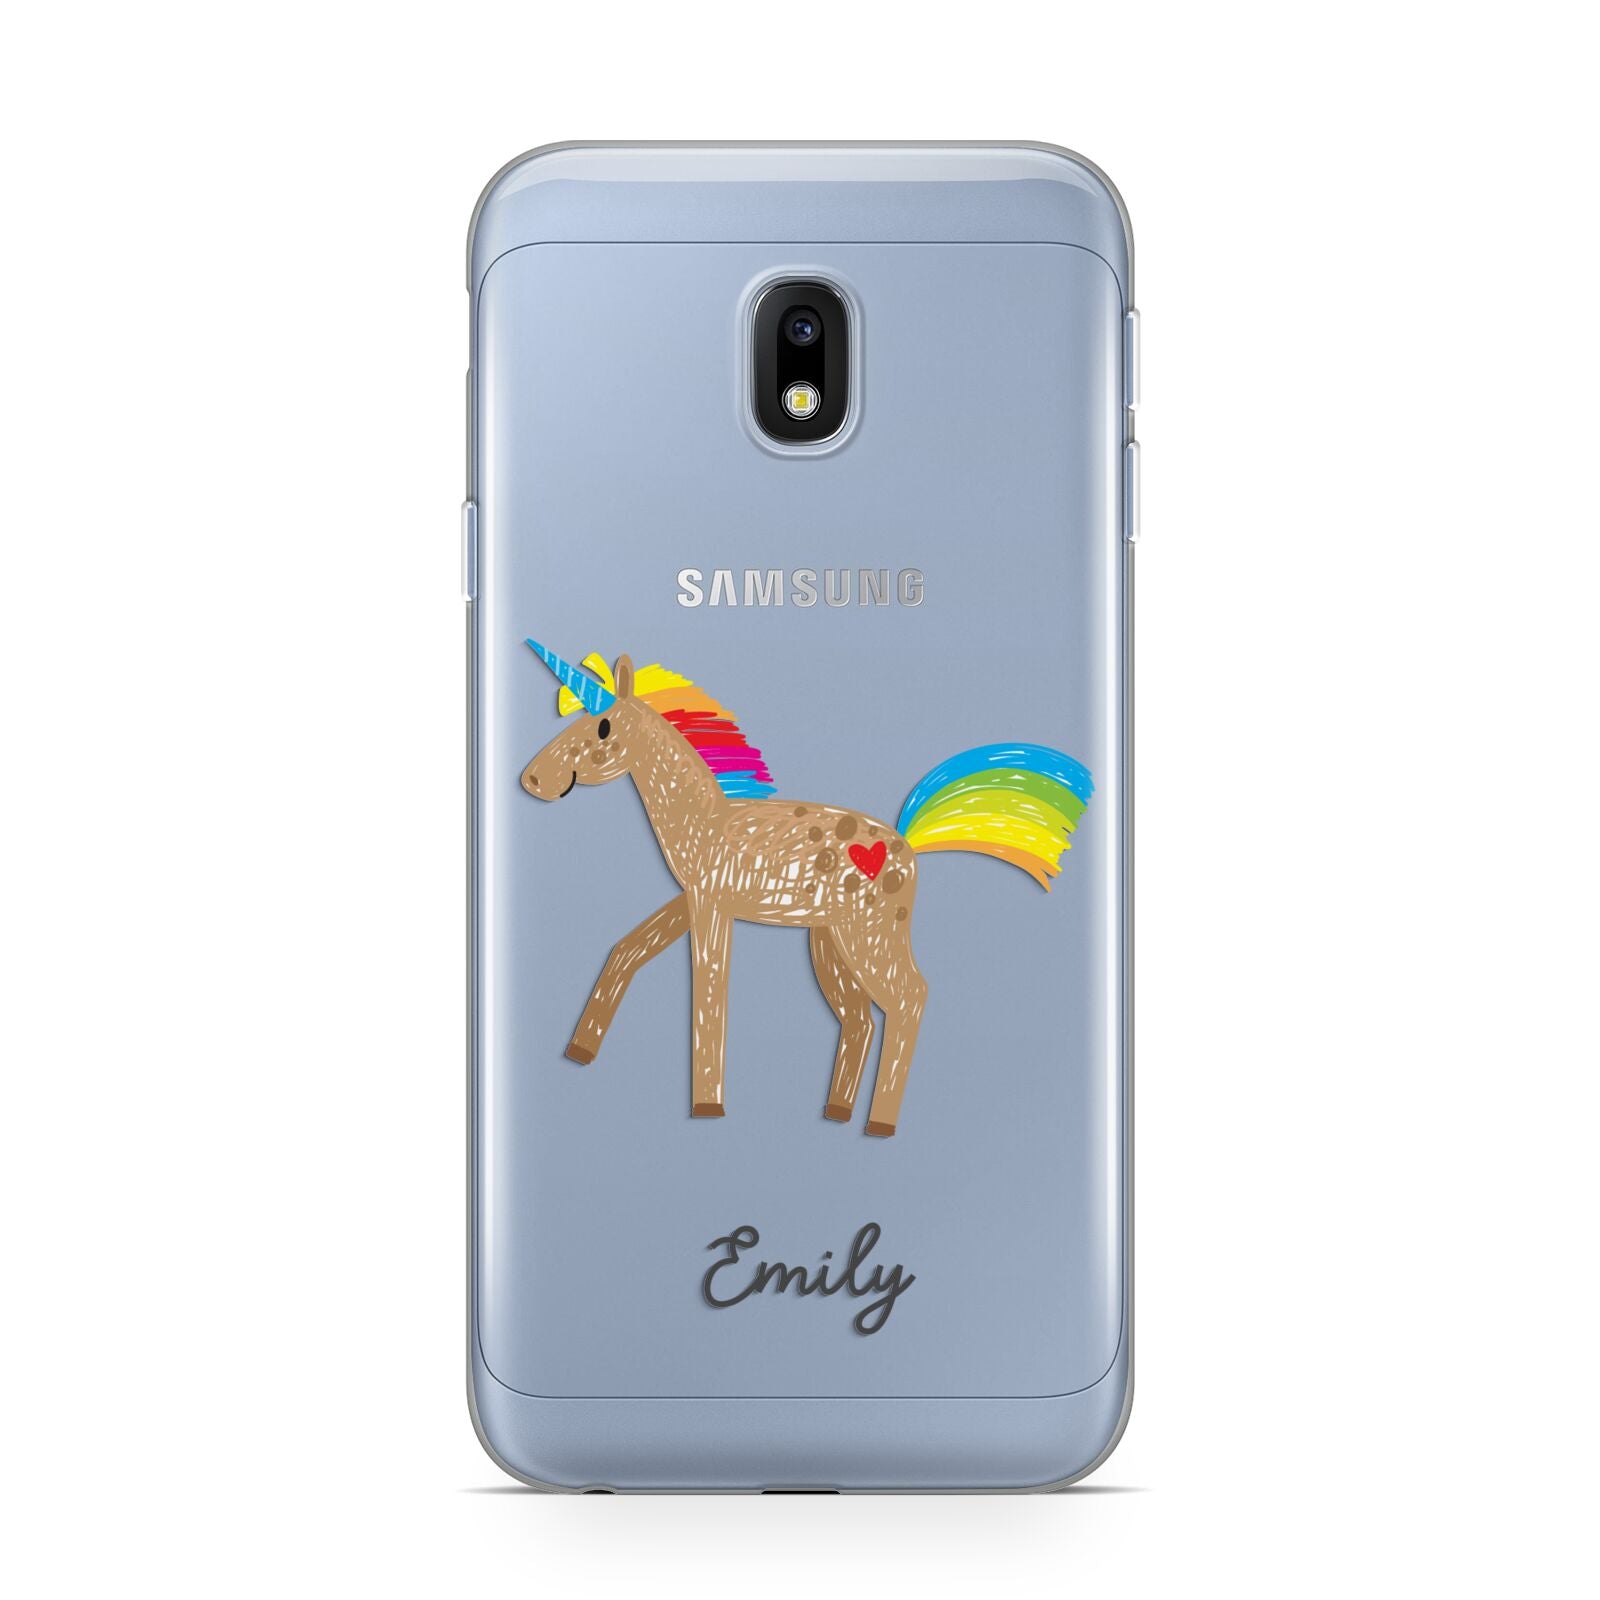 Personalised Unicorn with Name Samsung Galaxy J3 2017 Case